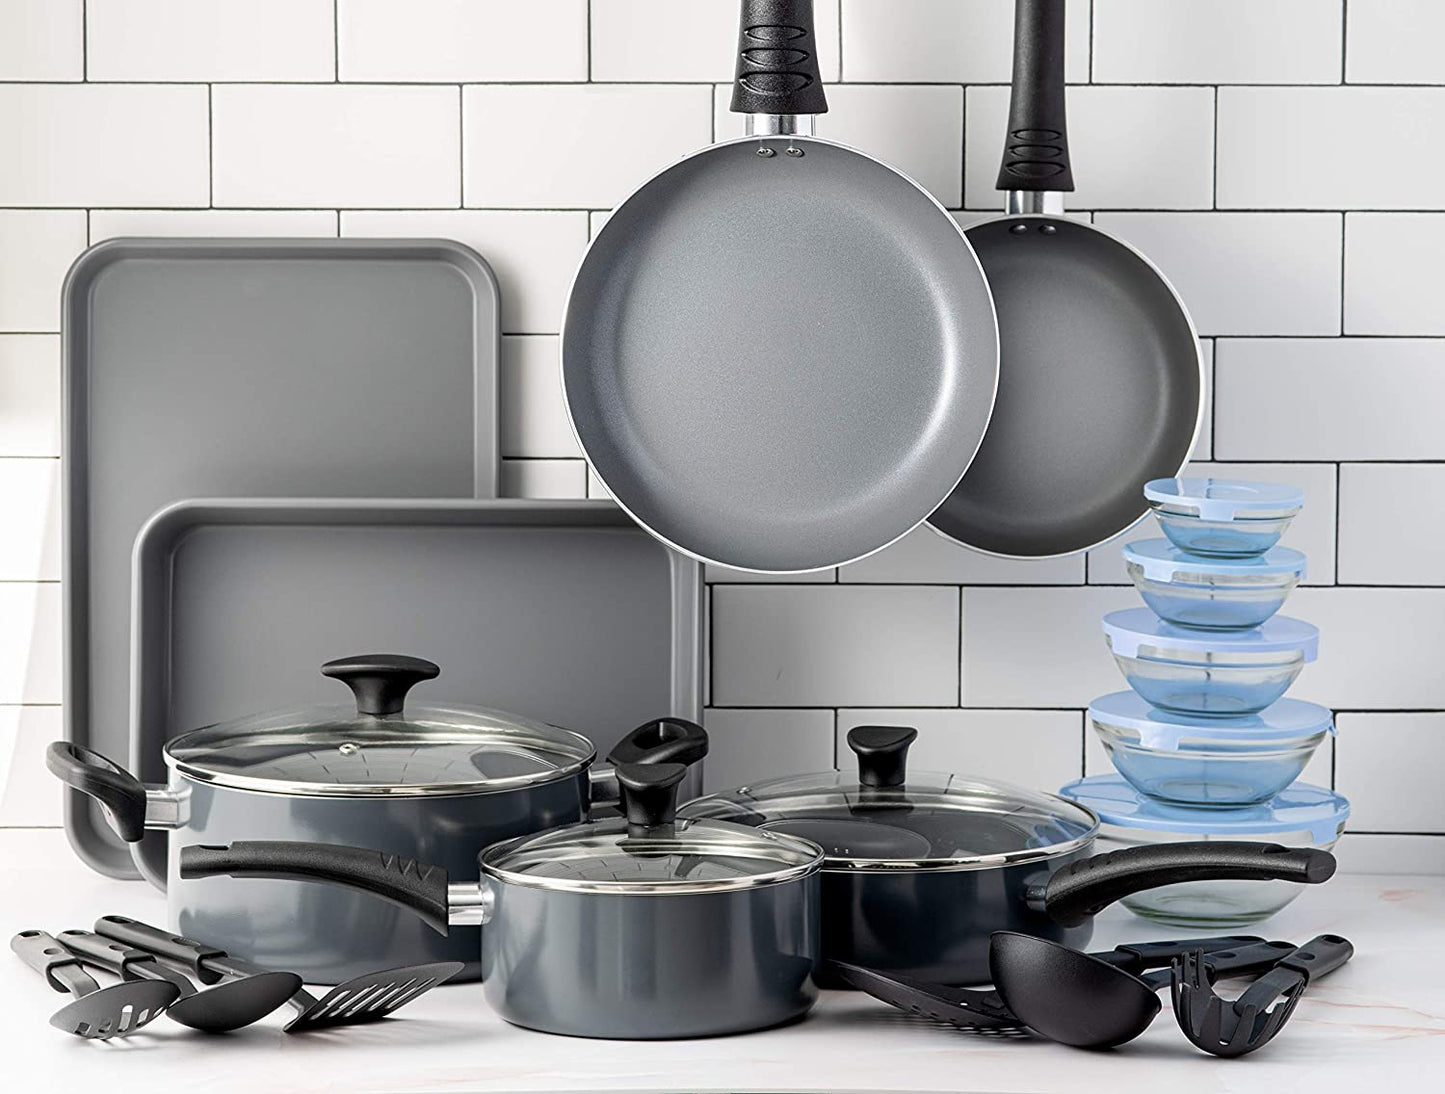 21-Piece Black Nonstick Cookware Set with Glass Lids - Includes Aluminum Bakeware, Pots and Pans, Storage Bowls & Utensils - Compatible with All Stovetops